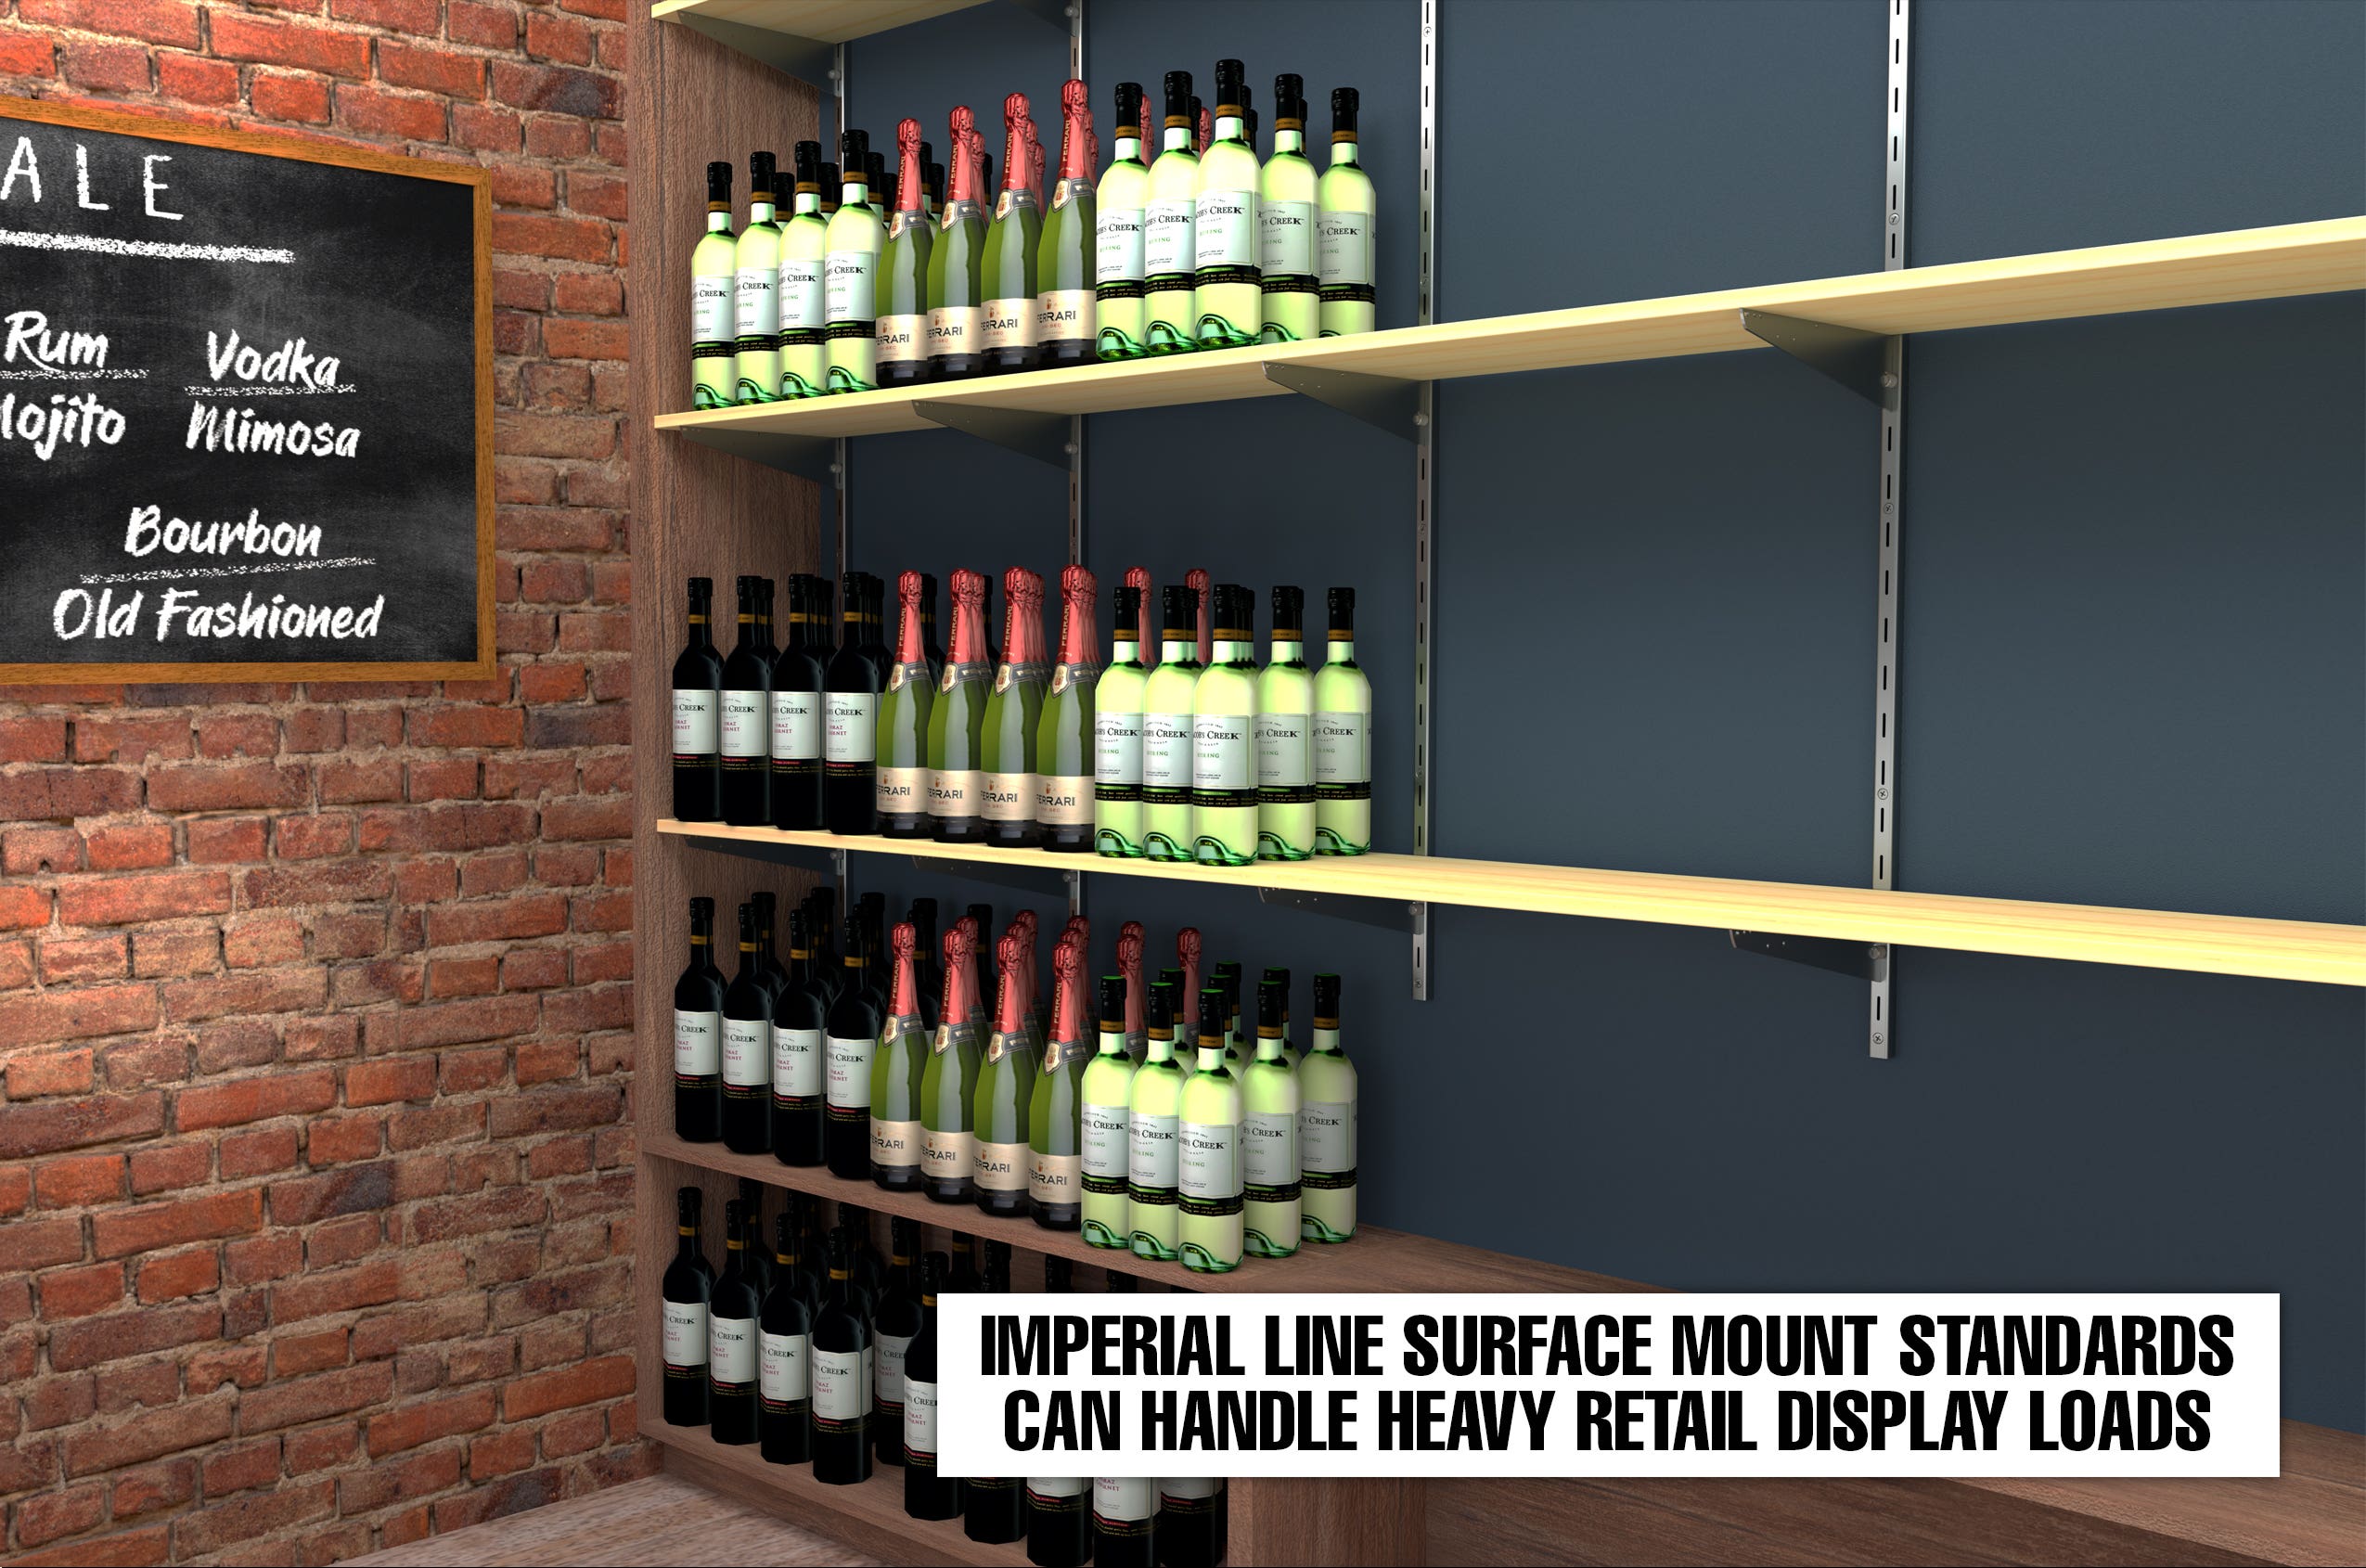 imperial standards are the ideal solutions for heavy retail displays